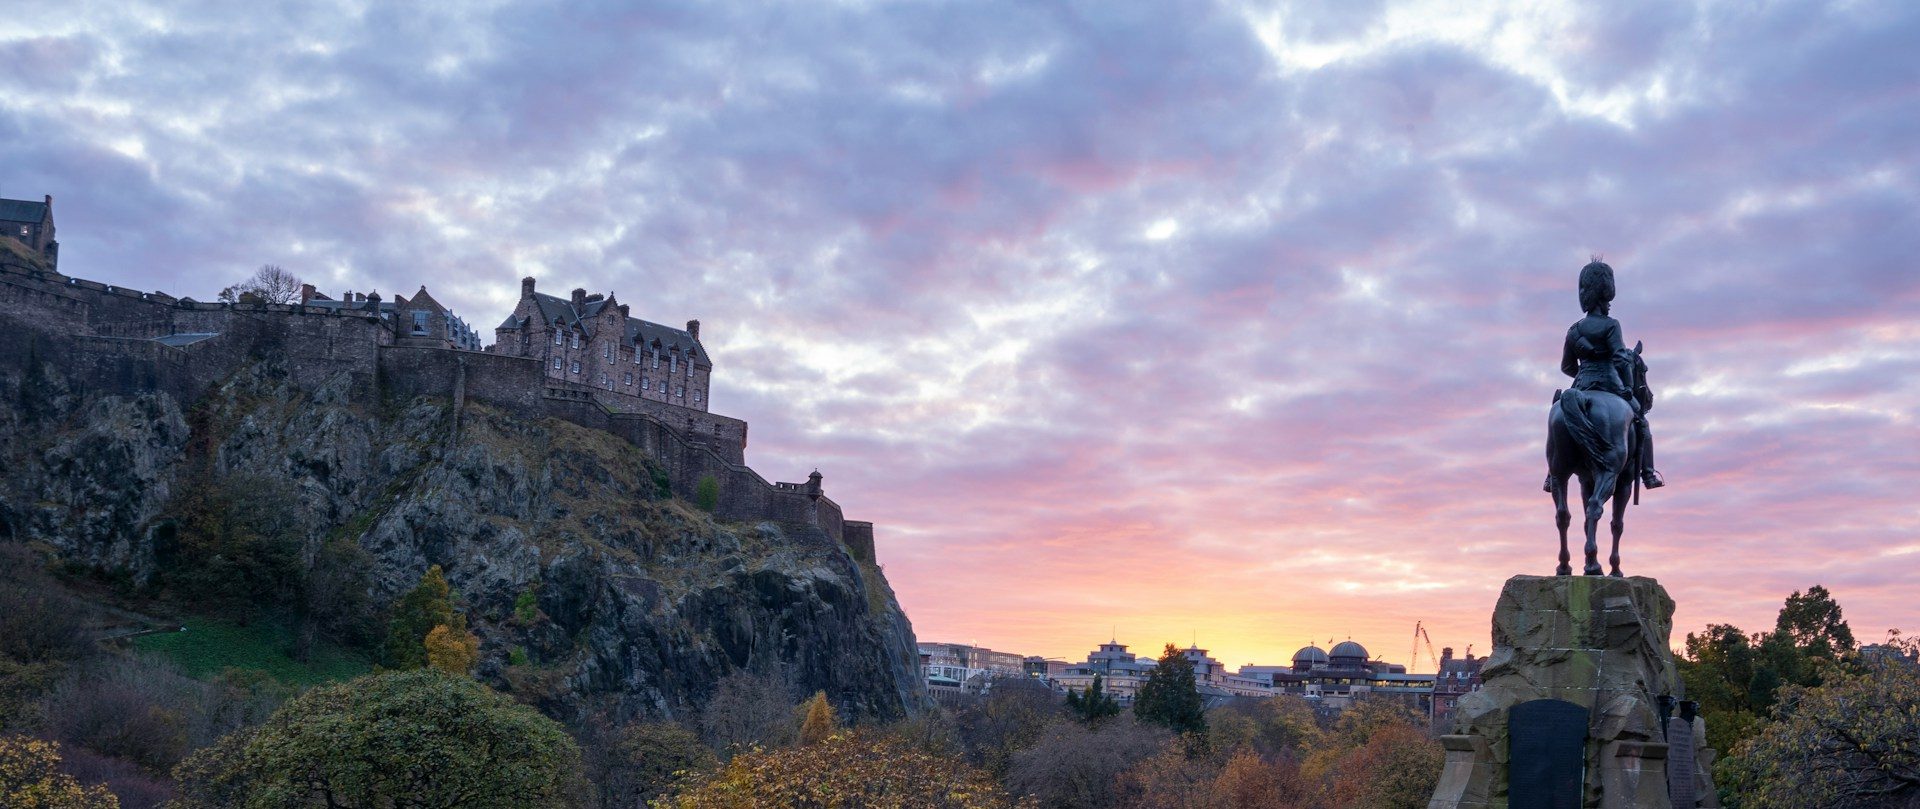 Endless Romance: The Ultimate Guide to Date Ideas in Edinburgh